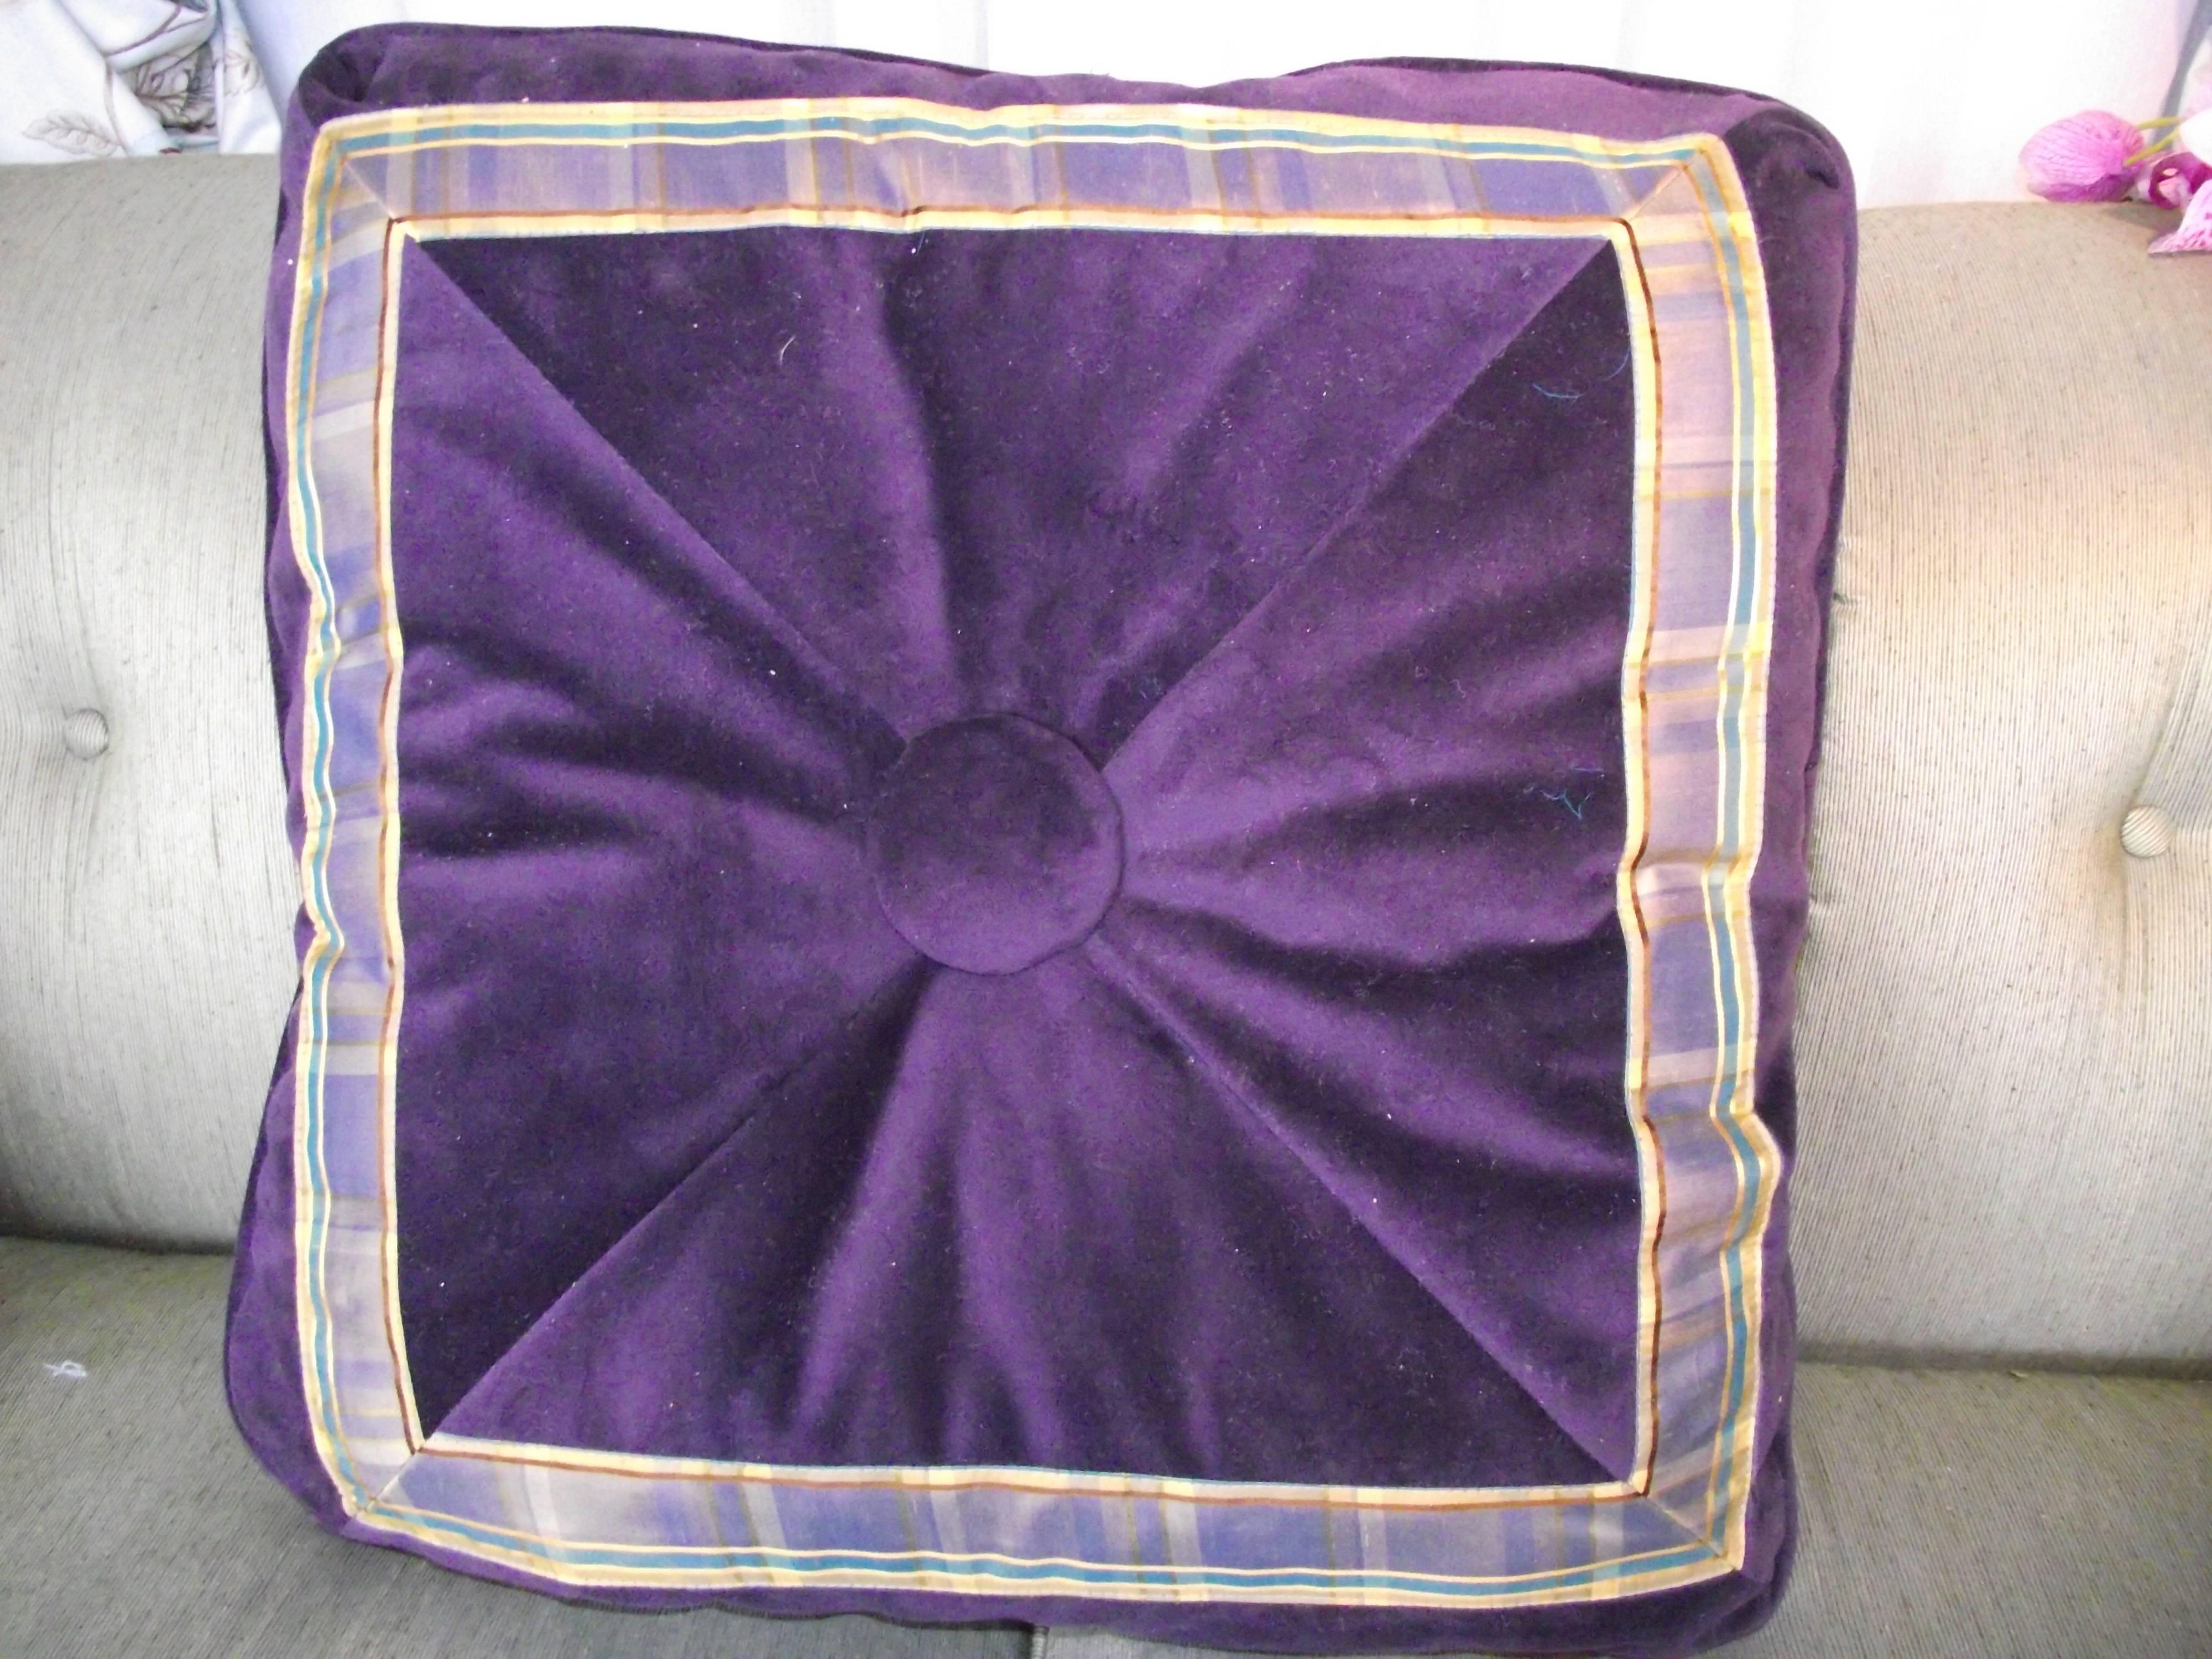 This GANTT designed comfort pillow is covered on one side with aubergine velvet trimmed with a plaid silk pattern. Both sides of this unusual pillow feature an over sized padded center button.

The opposite side is covered in the same velvet with a